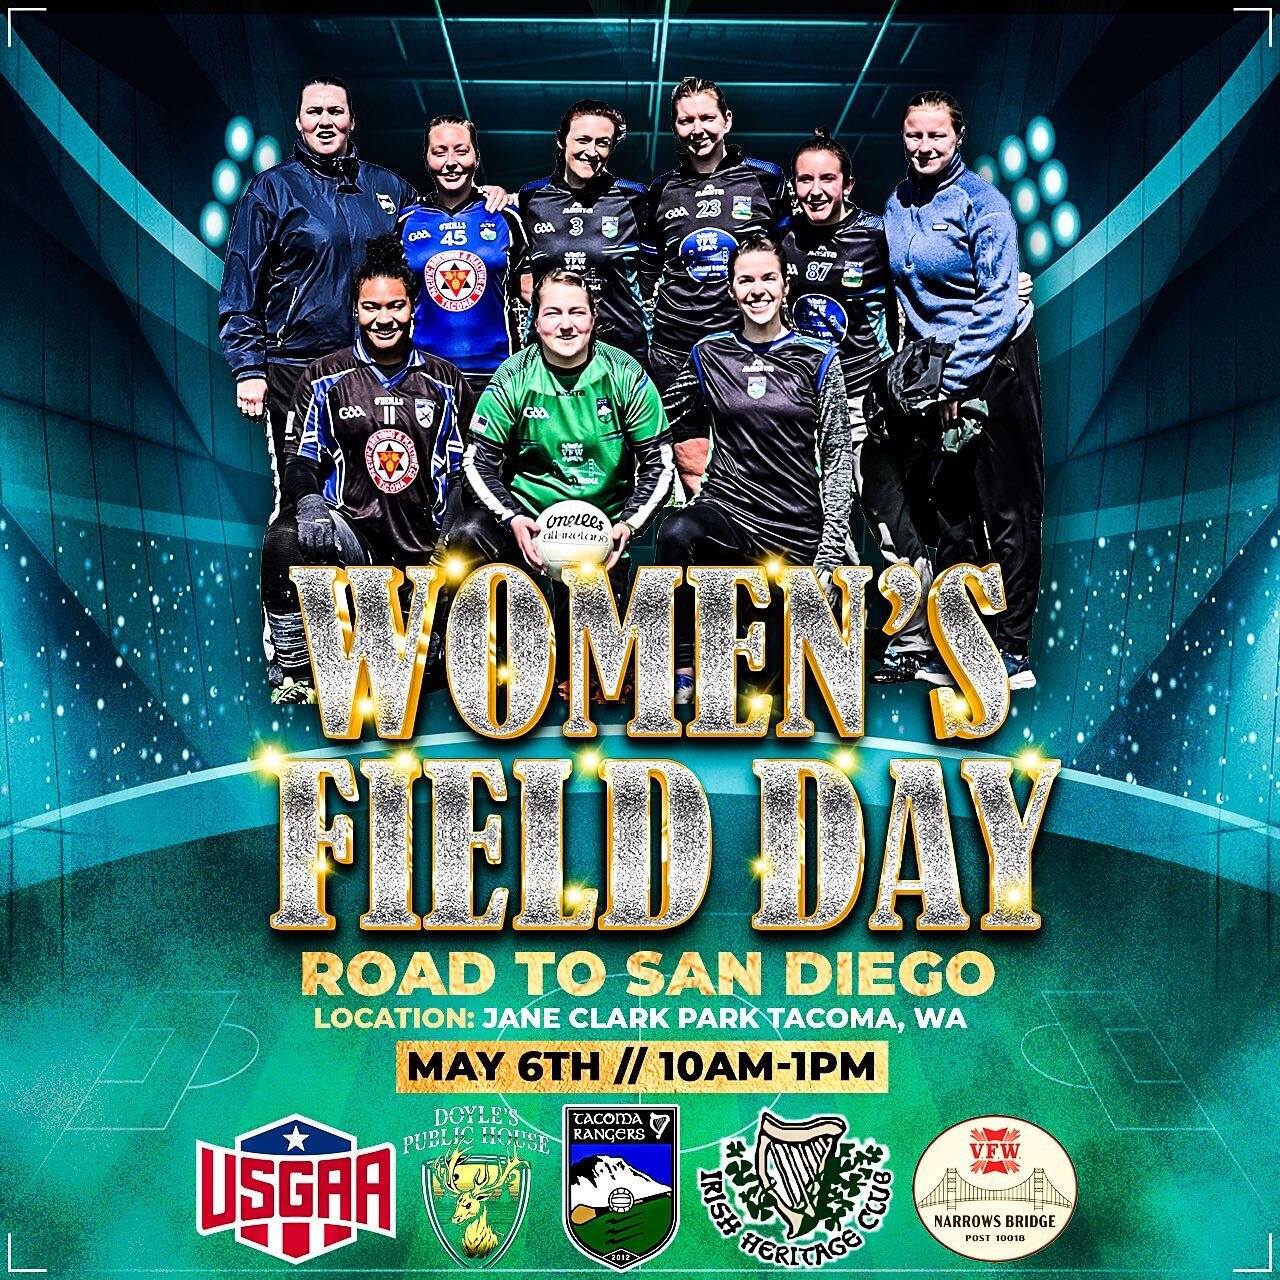 Tacoma Rangers are hosting a Women&rsquo;s Field Day and are inviting the ladies of the PNW to a day of some friendly scrimmages/introduction to Camogie &amp; Gaelic Football. This is a great opportunity to get some extra game time in before West Coa